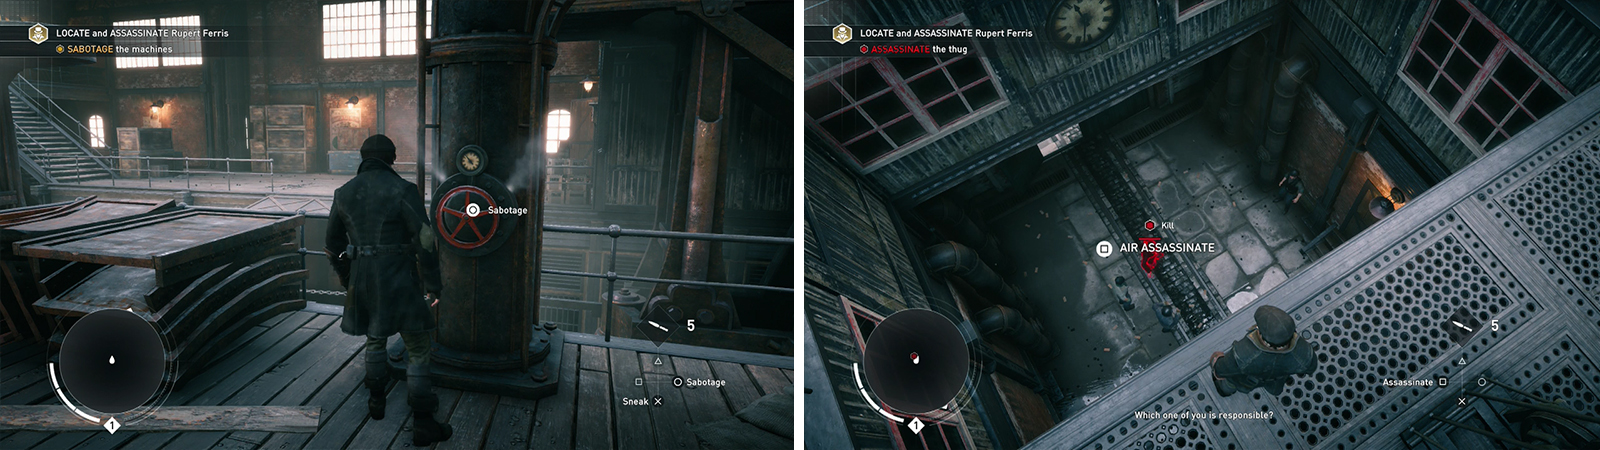 Disable the valves around the room (left). Air assassinate the guard that appears below (right).